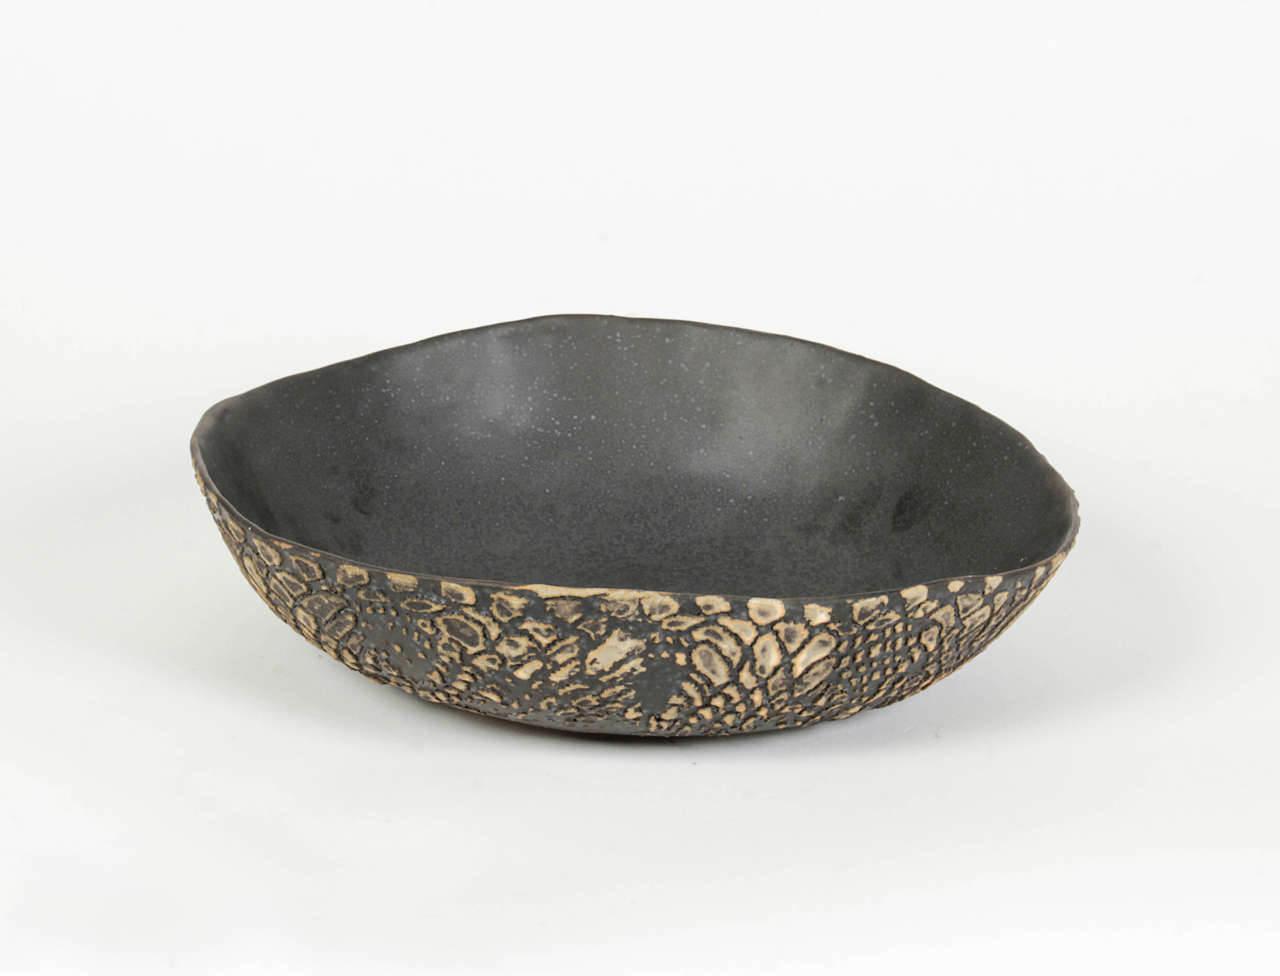 Hand crafted decorative Thai ceramic bowl with gold etching. Personally selected by Donna Karan for her Urban Zen brand.